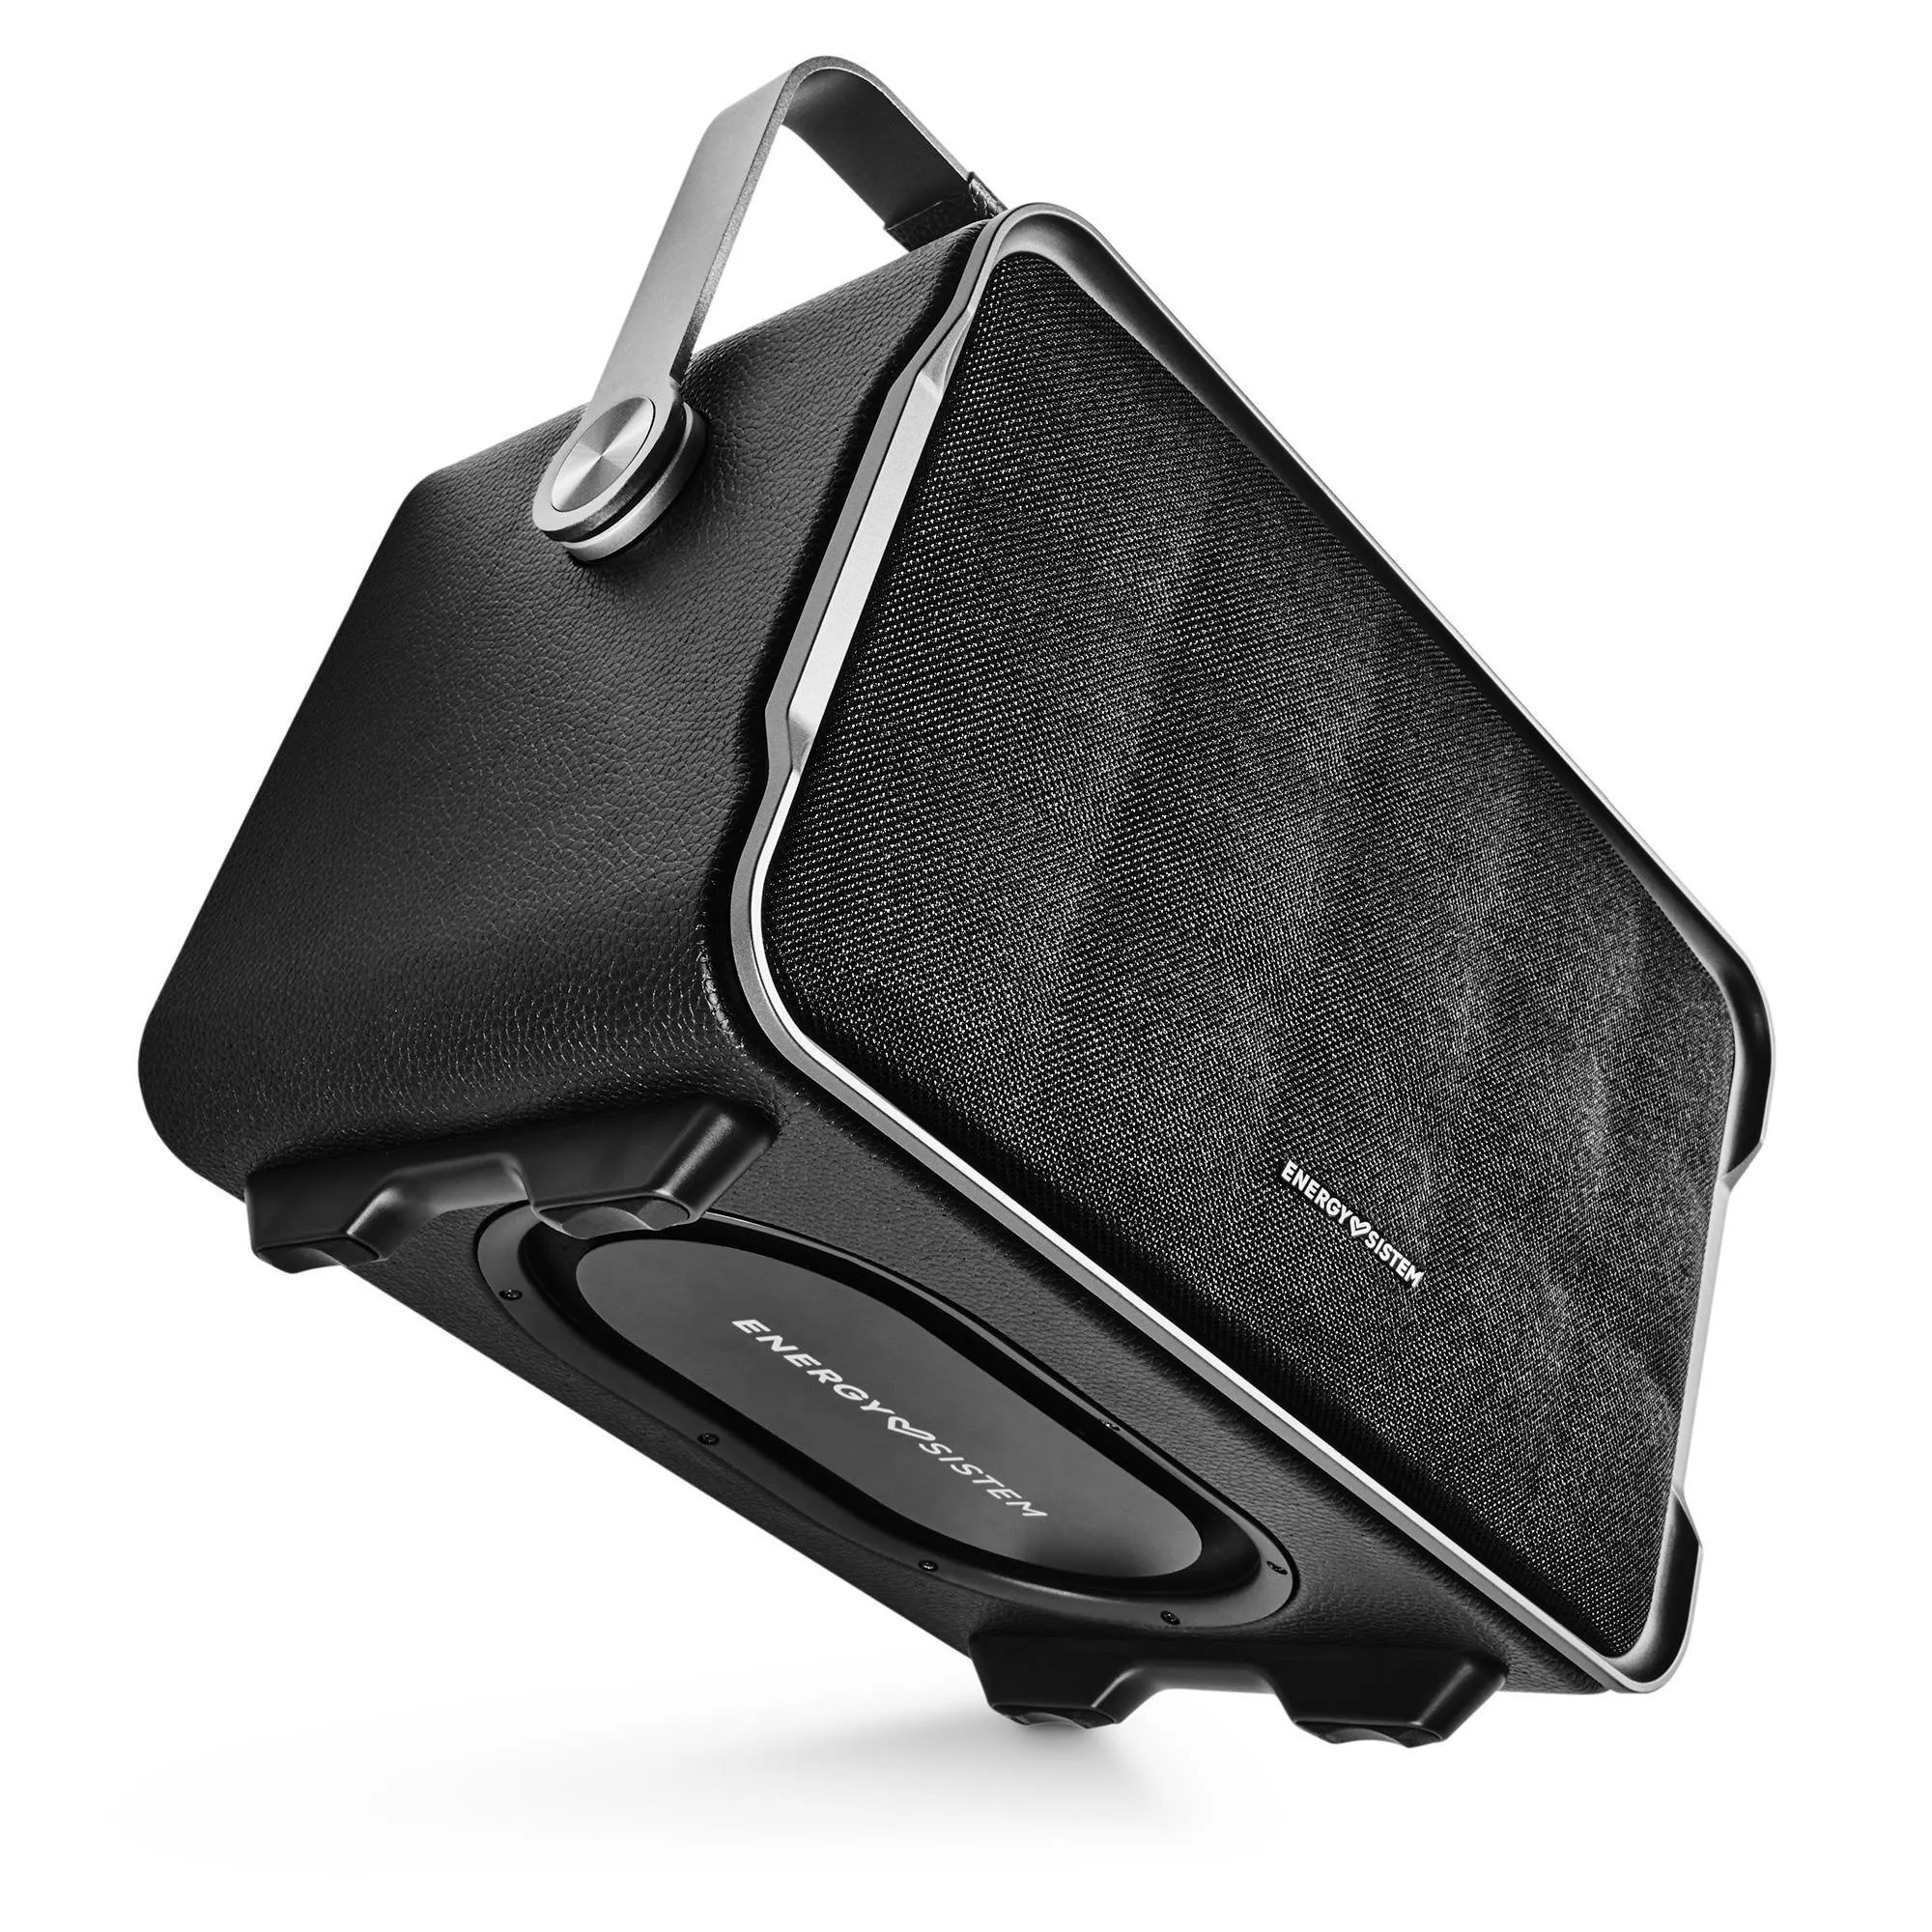 Classy portable speaker with foldable handle for easy and comfortable carrying